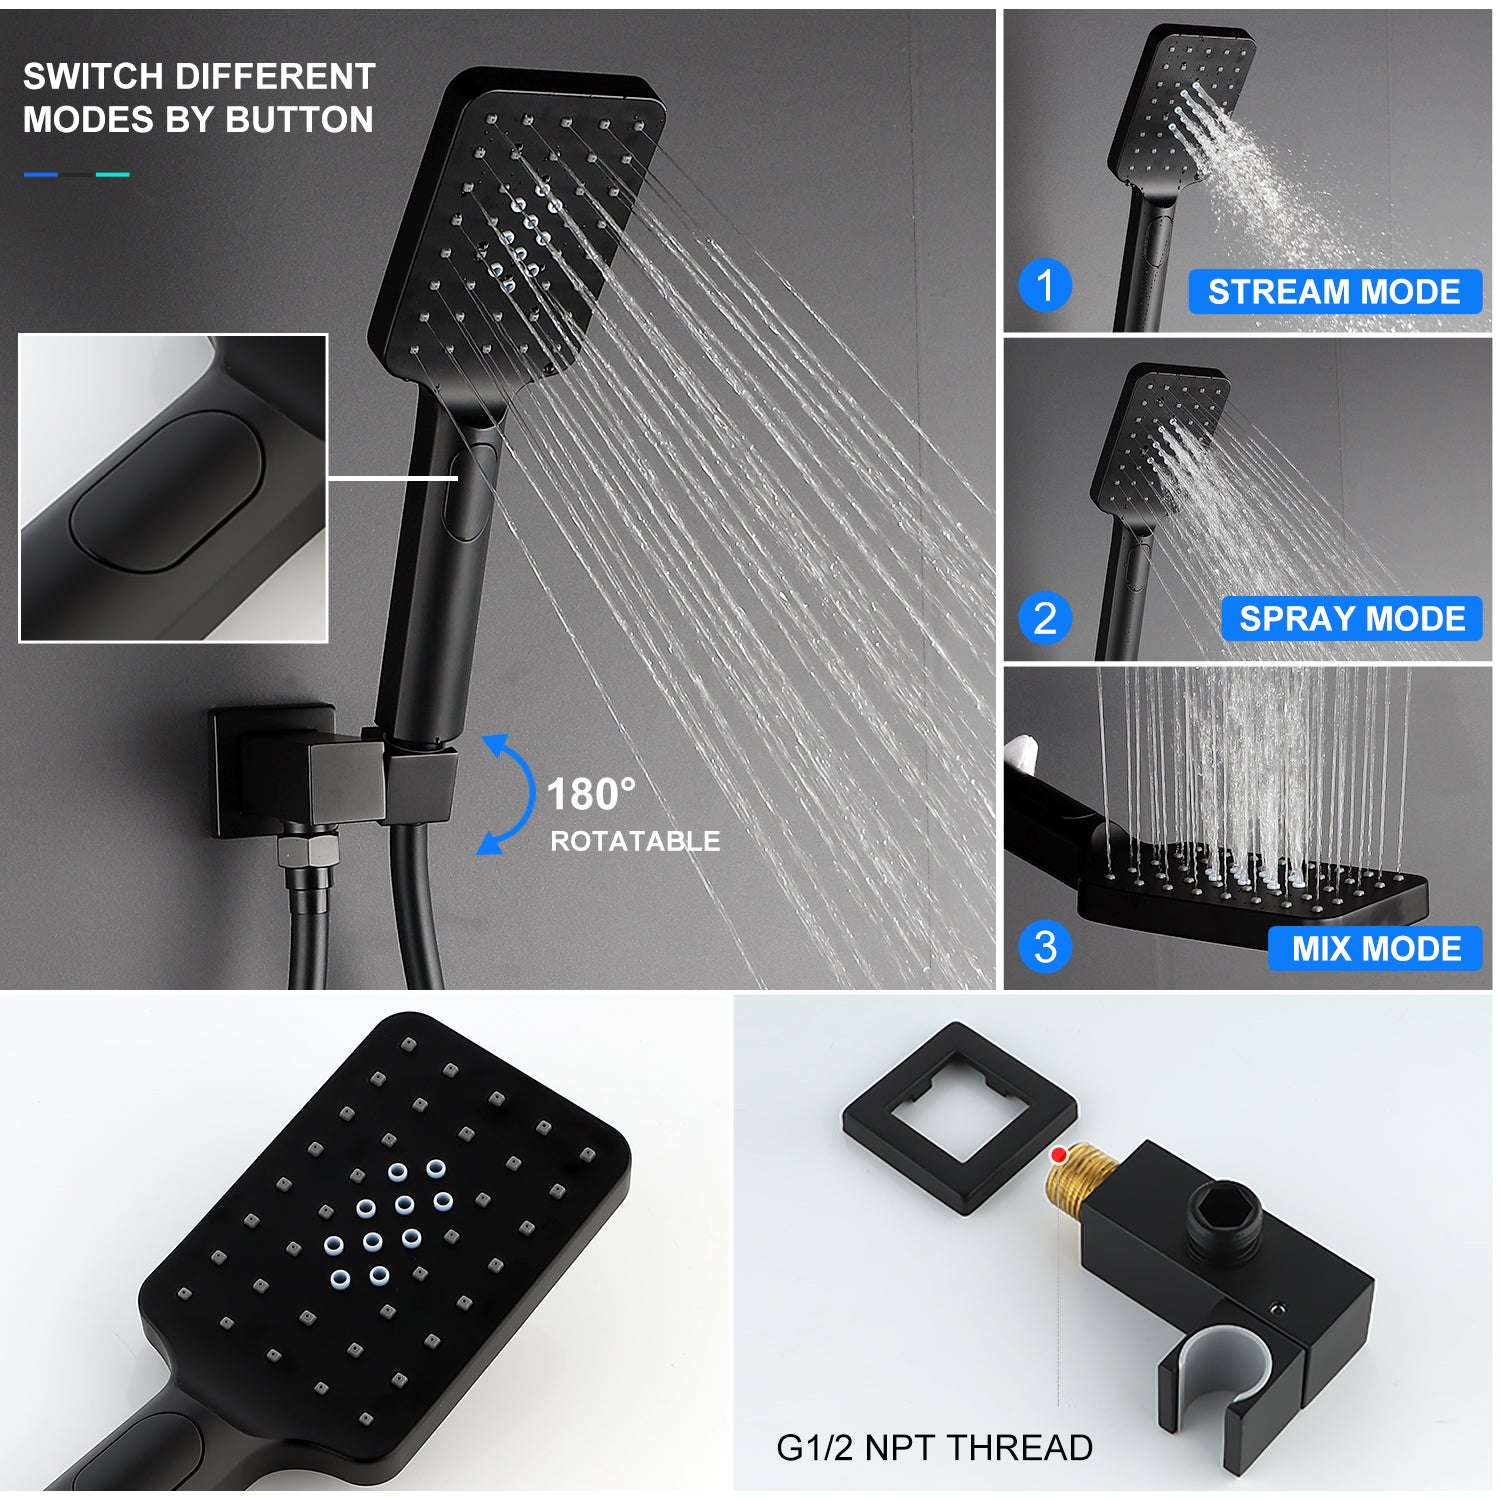 12" Shower Head 3-way Wall-Mount Square Shower Faucet with Rough-in Valve RX97203-12